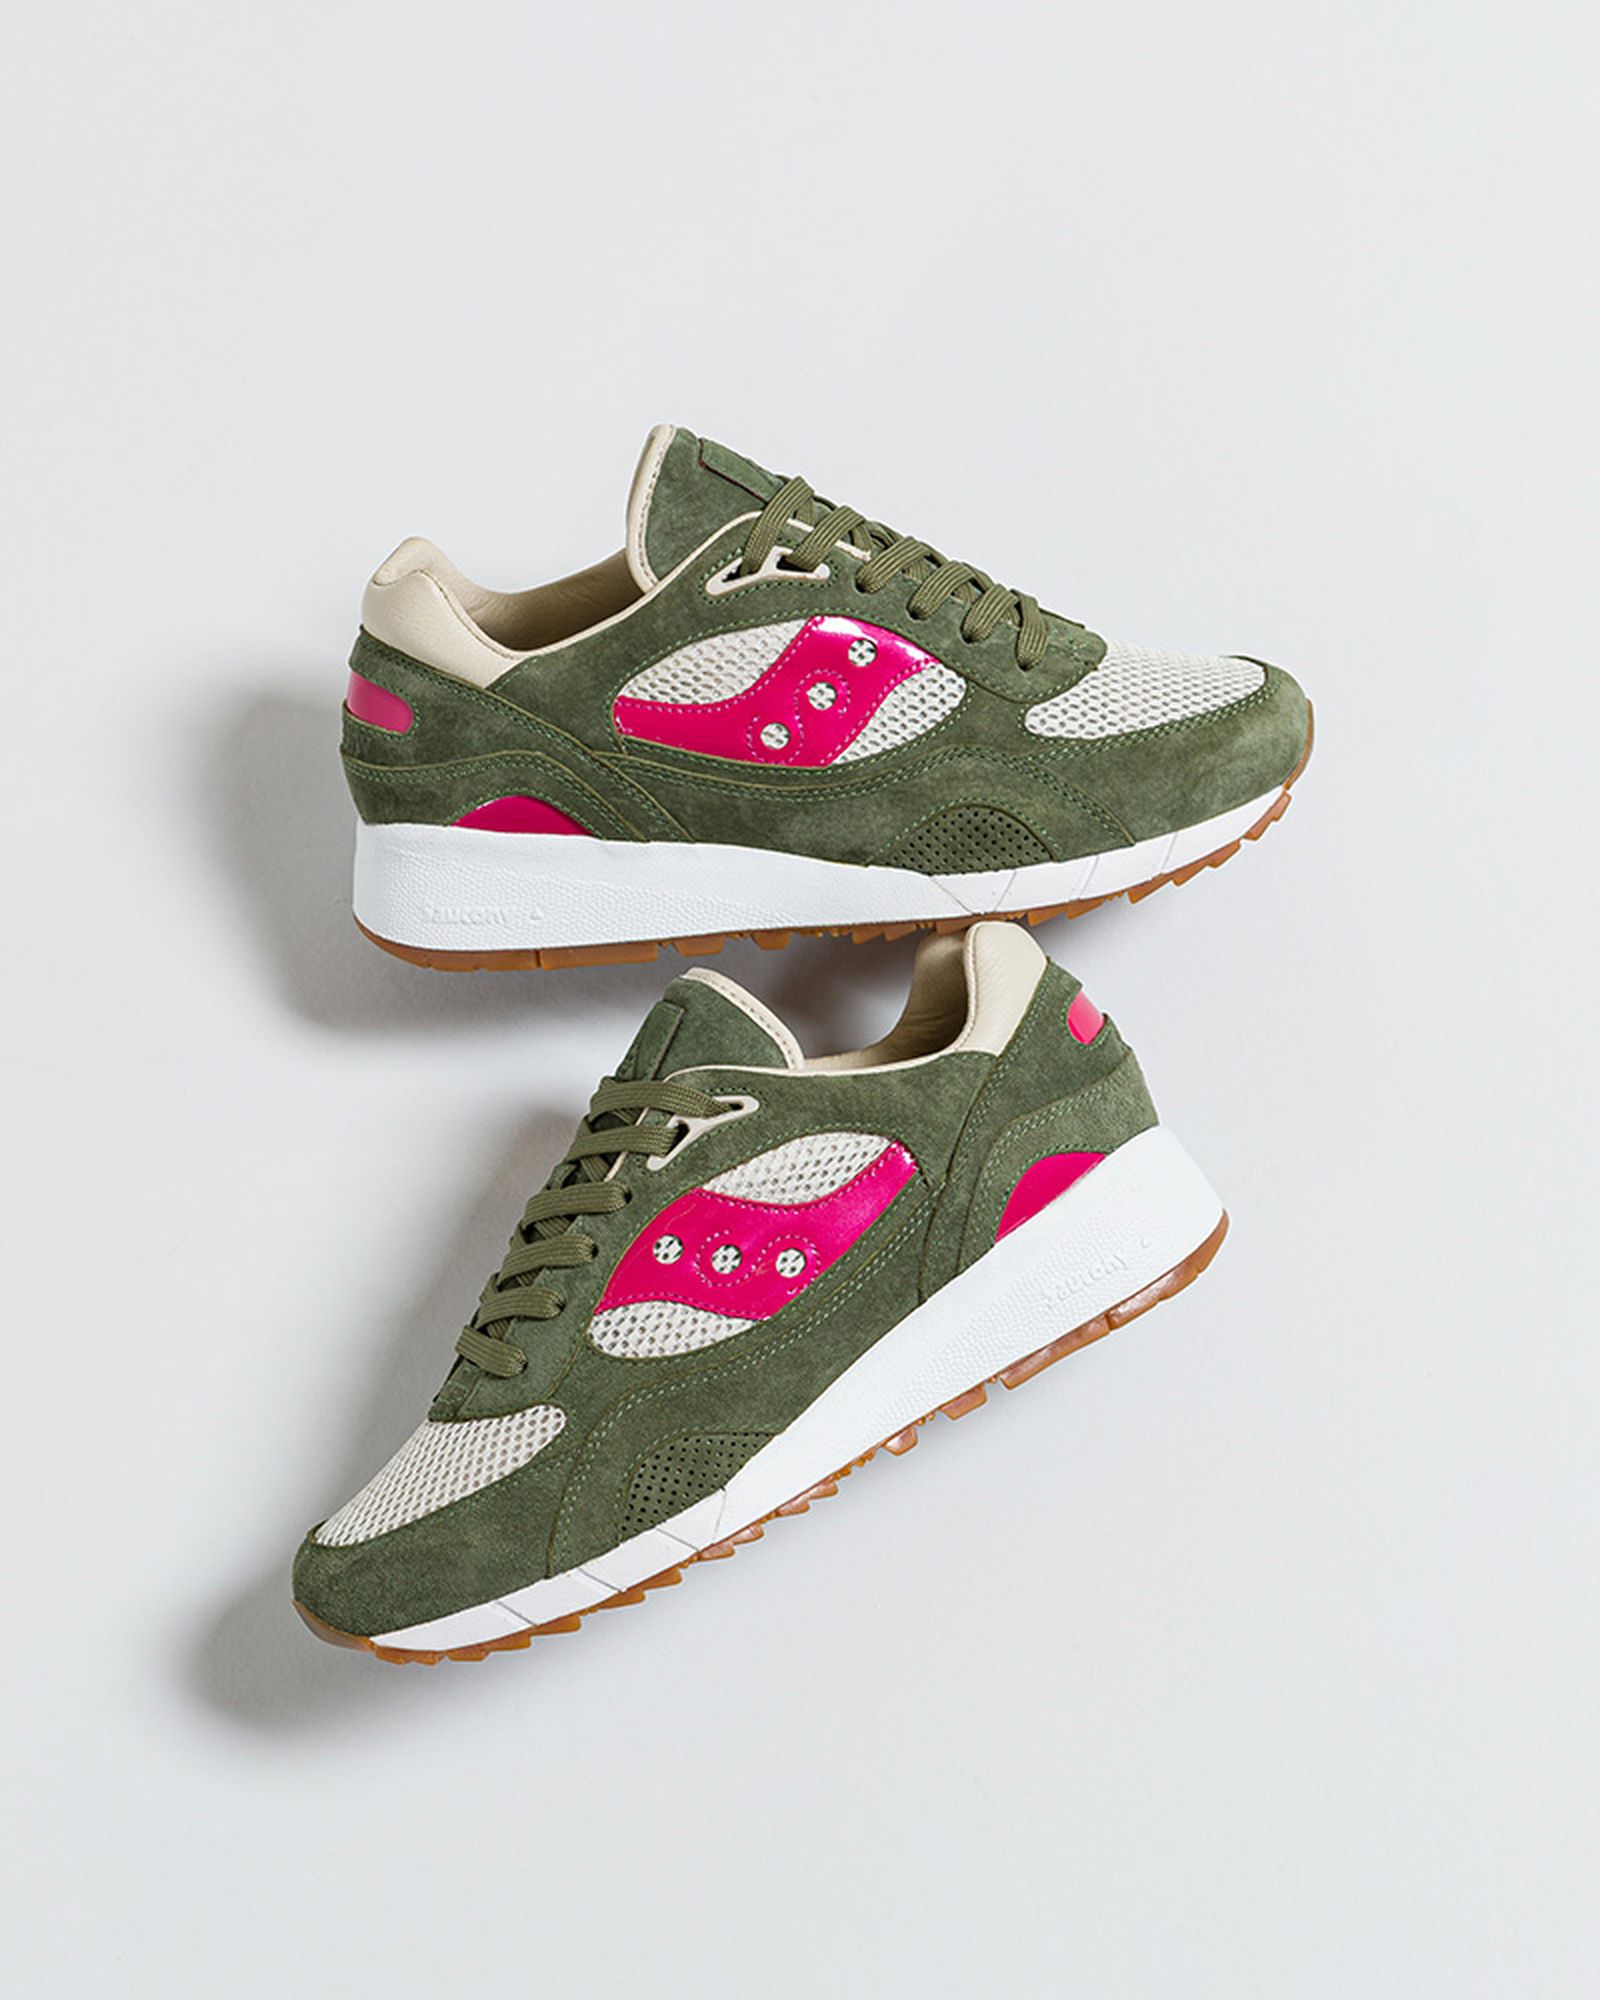 up-there-saucony-shadow-6000-release-date-price-03